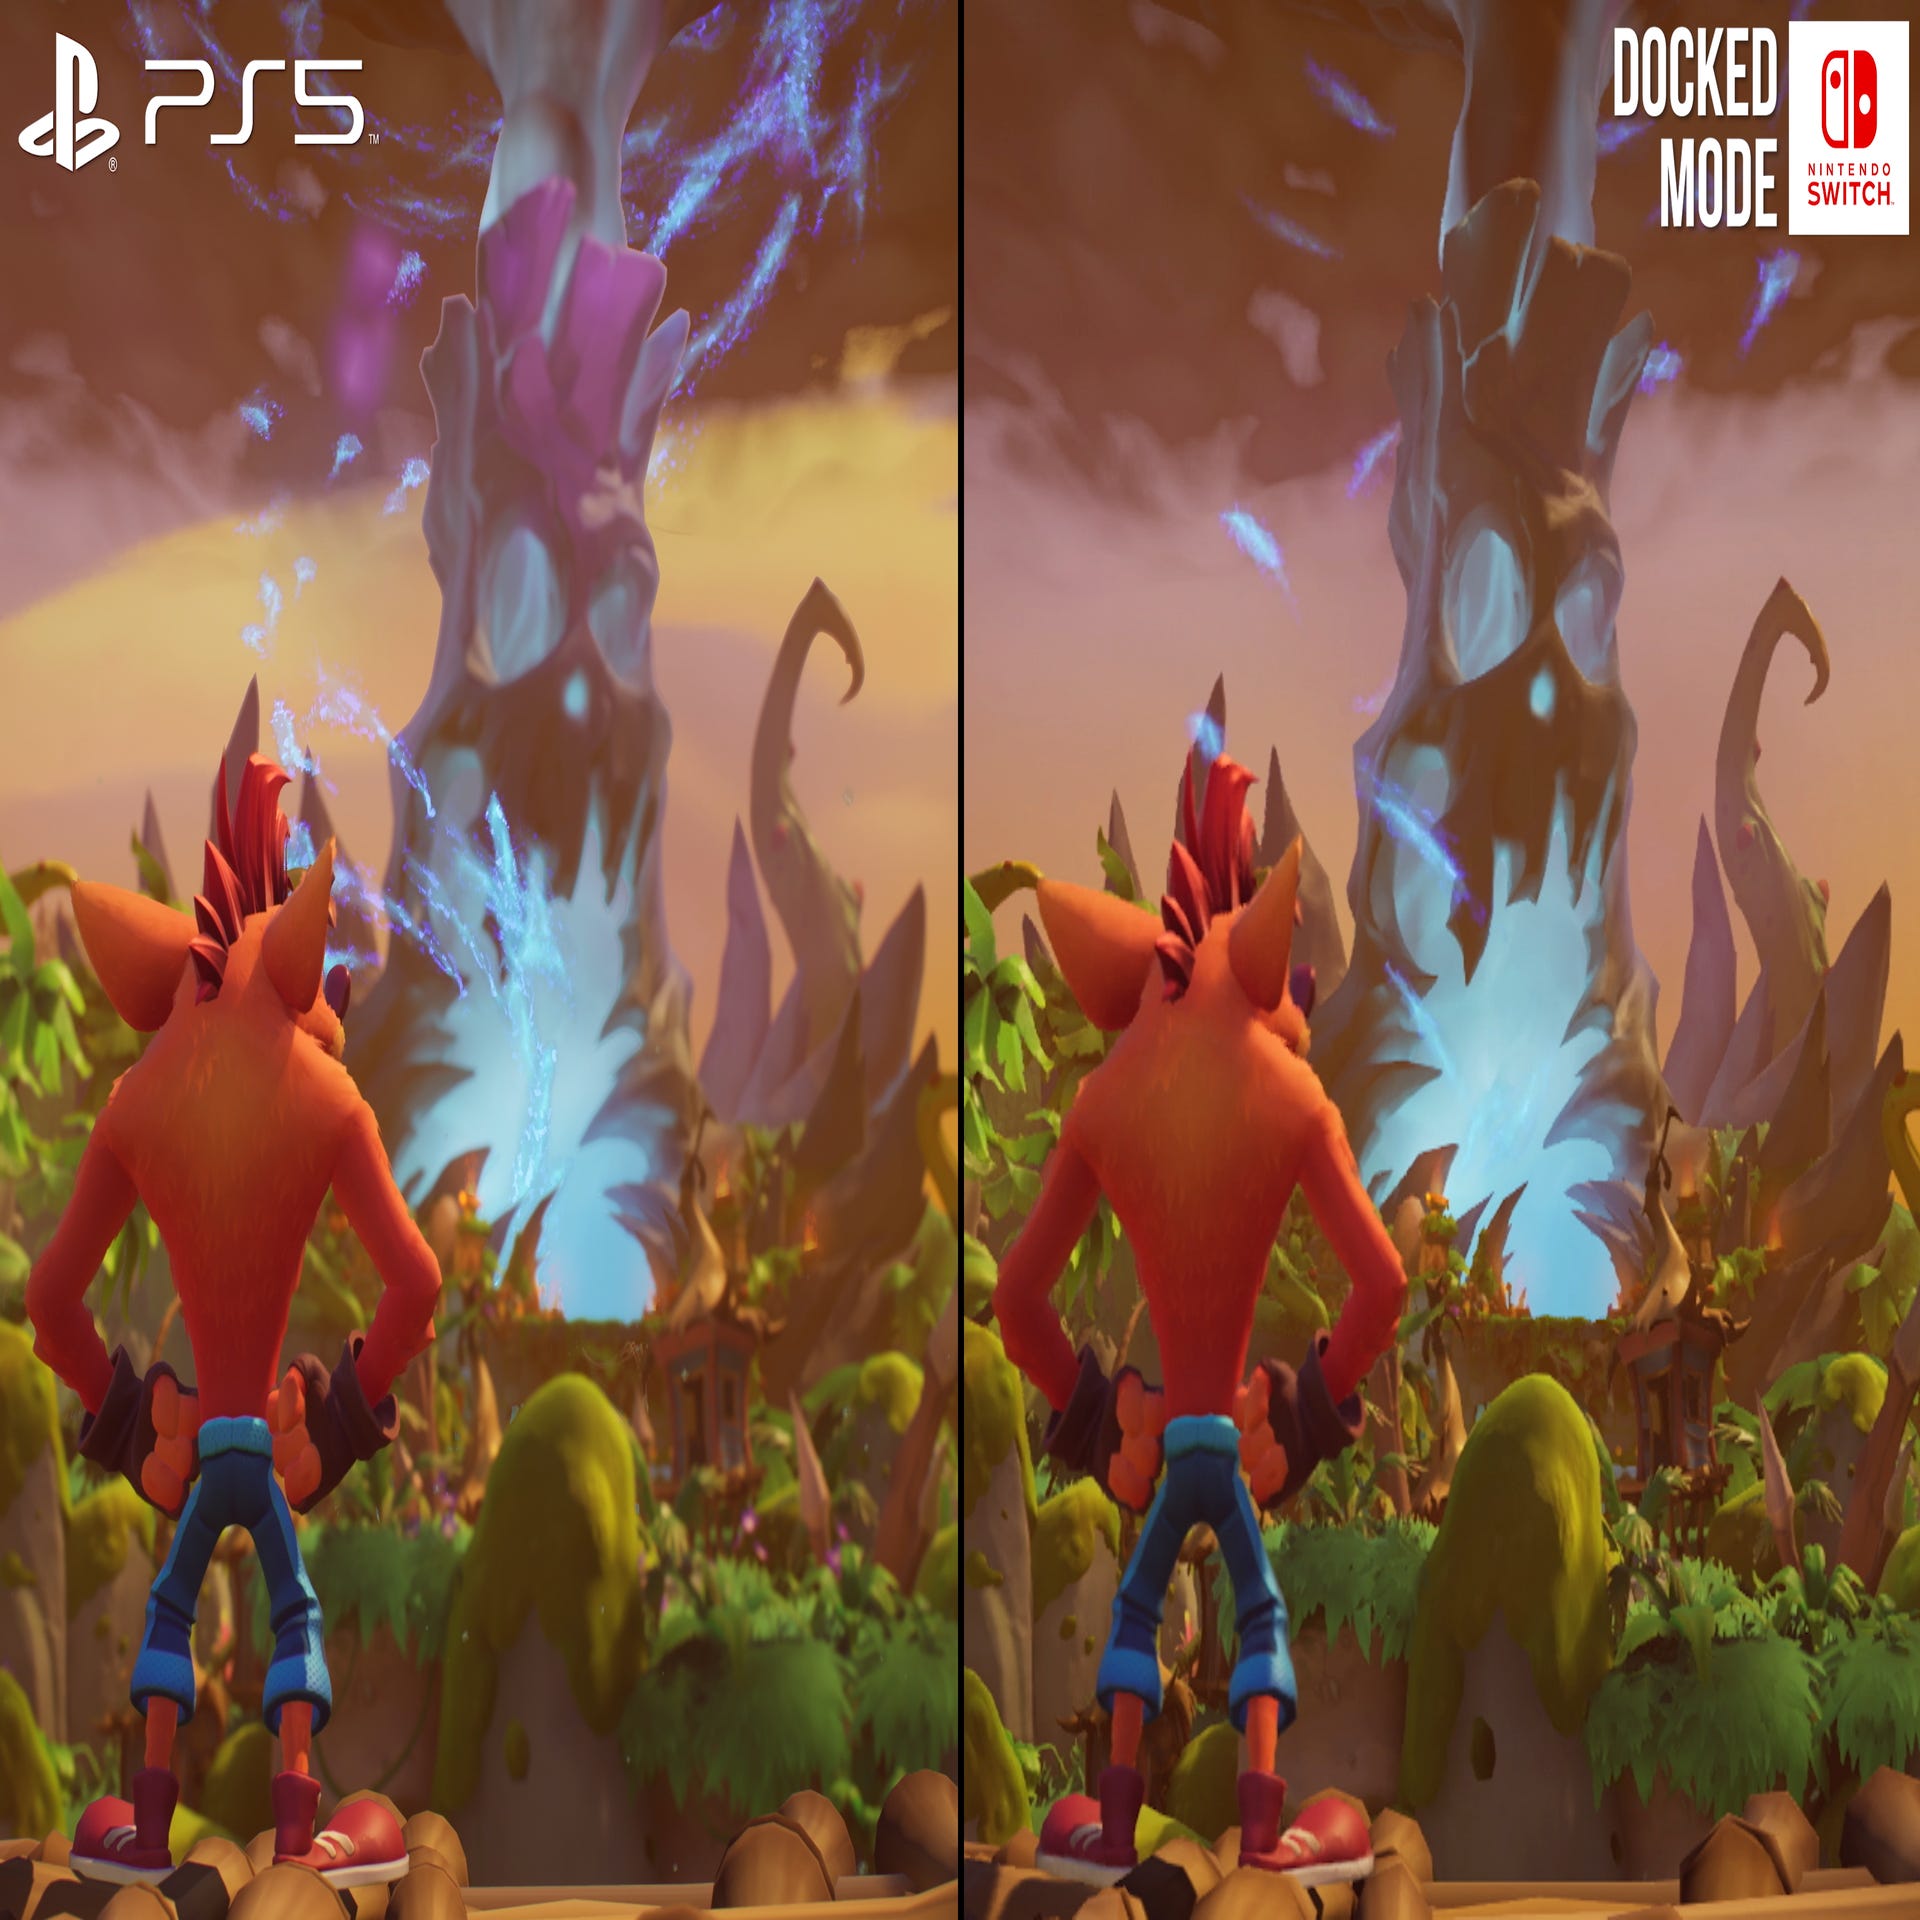 Crash Bandicoot 4 Switch port seems to have reworked models and assets  instead of just decreasing the resolution